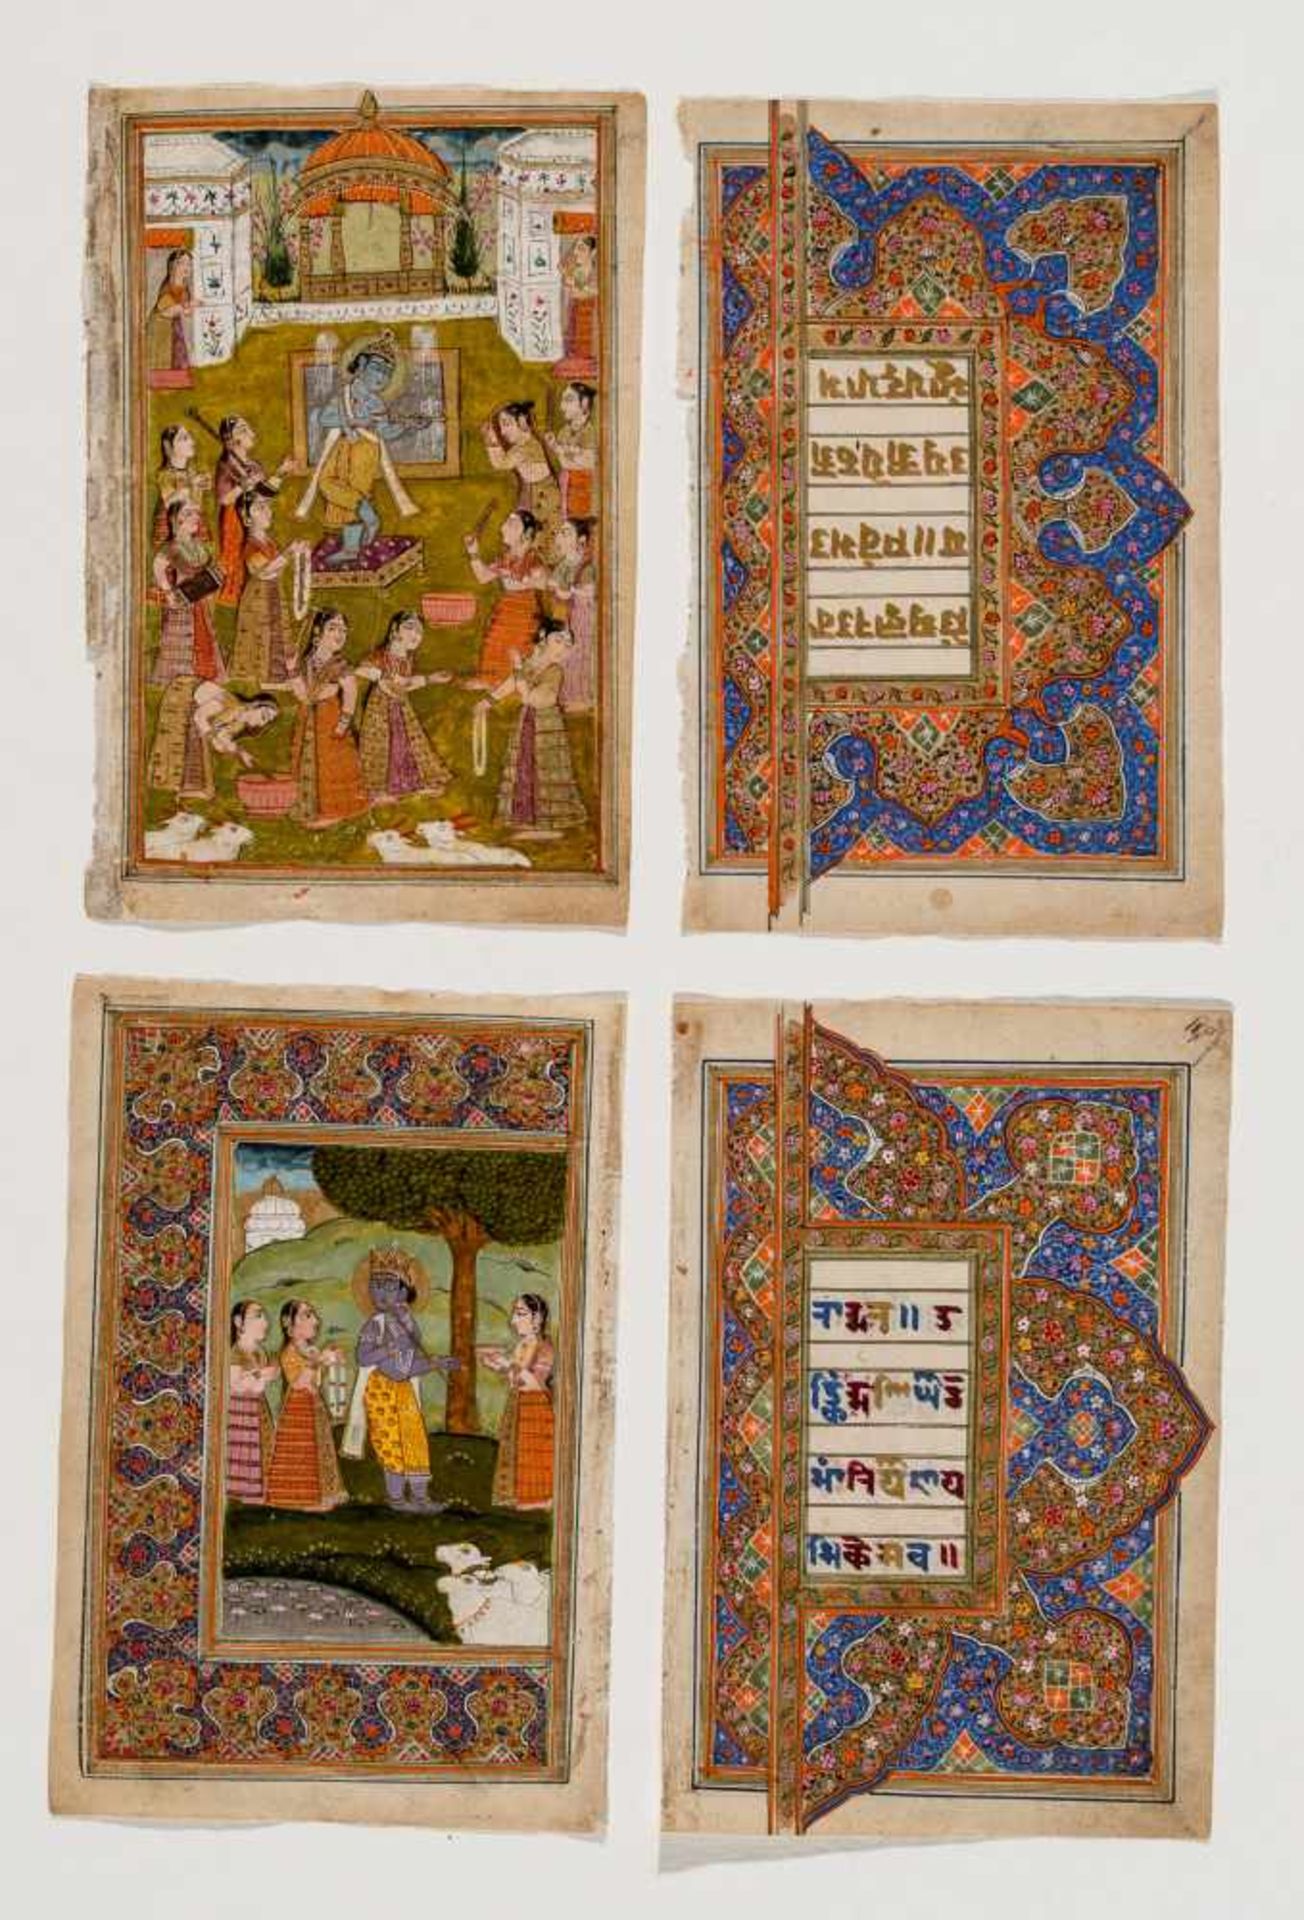 FOUR MINIATURE PAINTINGS DEPICTING DEITIES – INDIA, 19th CENTURYMiniature painting with gold and